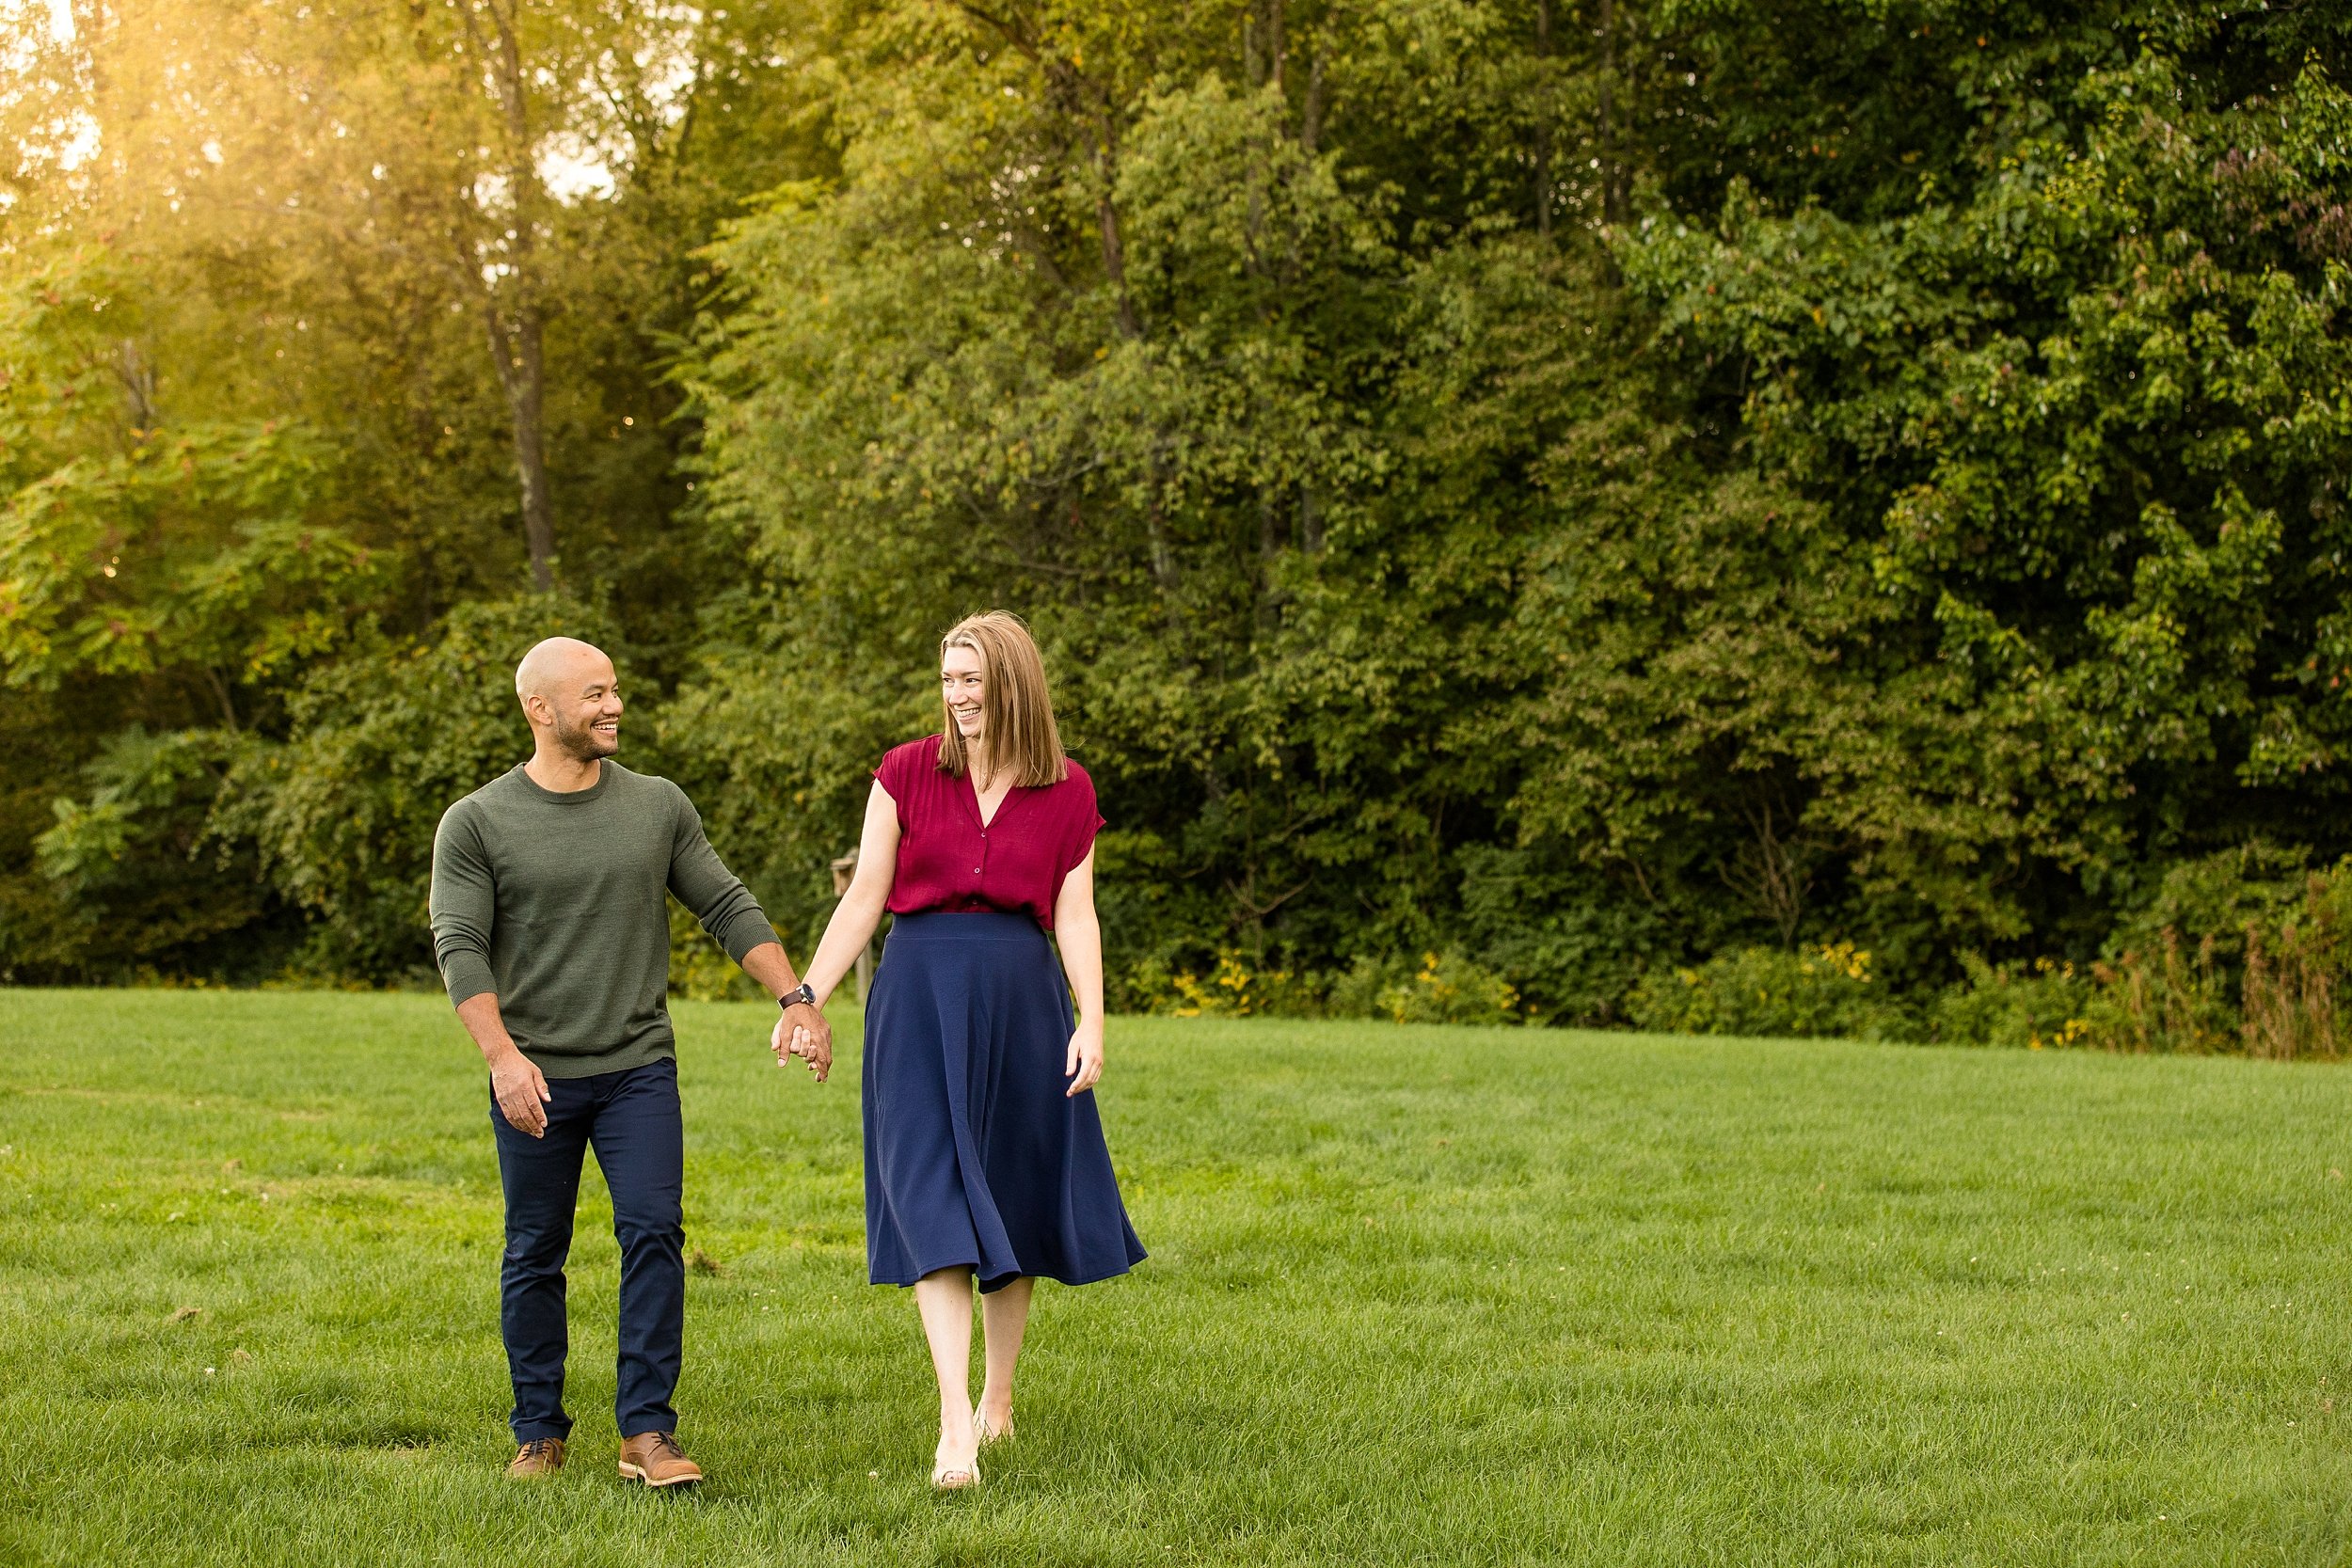 pittsburgh family photographer, monroeville community park family photos, cranberry township family photographer, zelienople family photographer